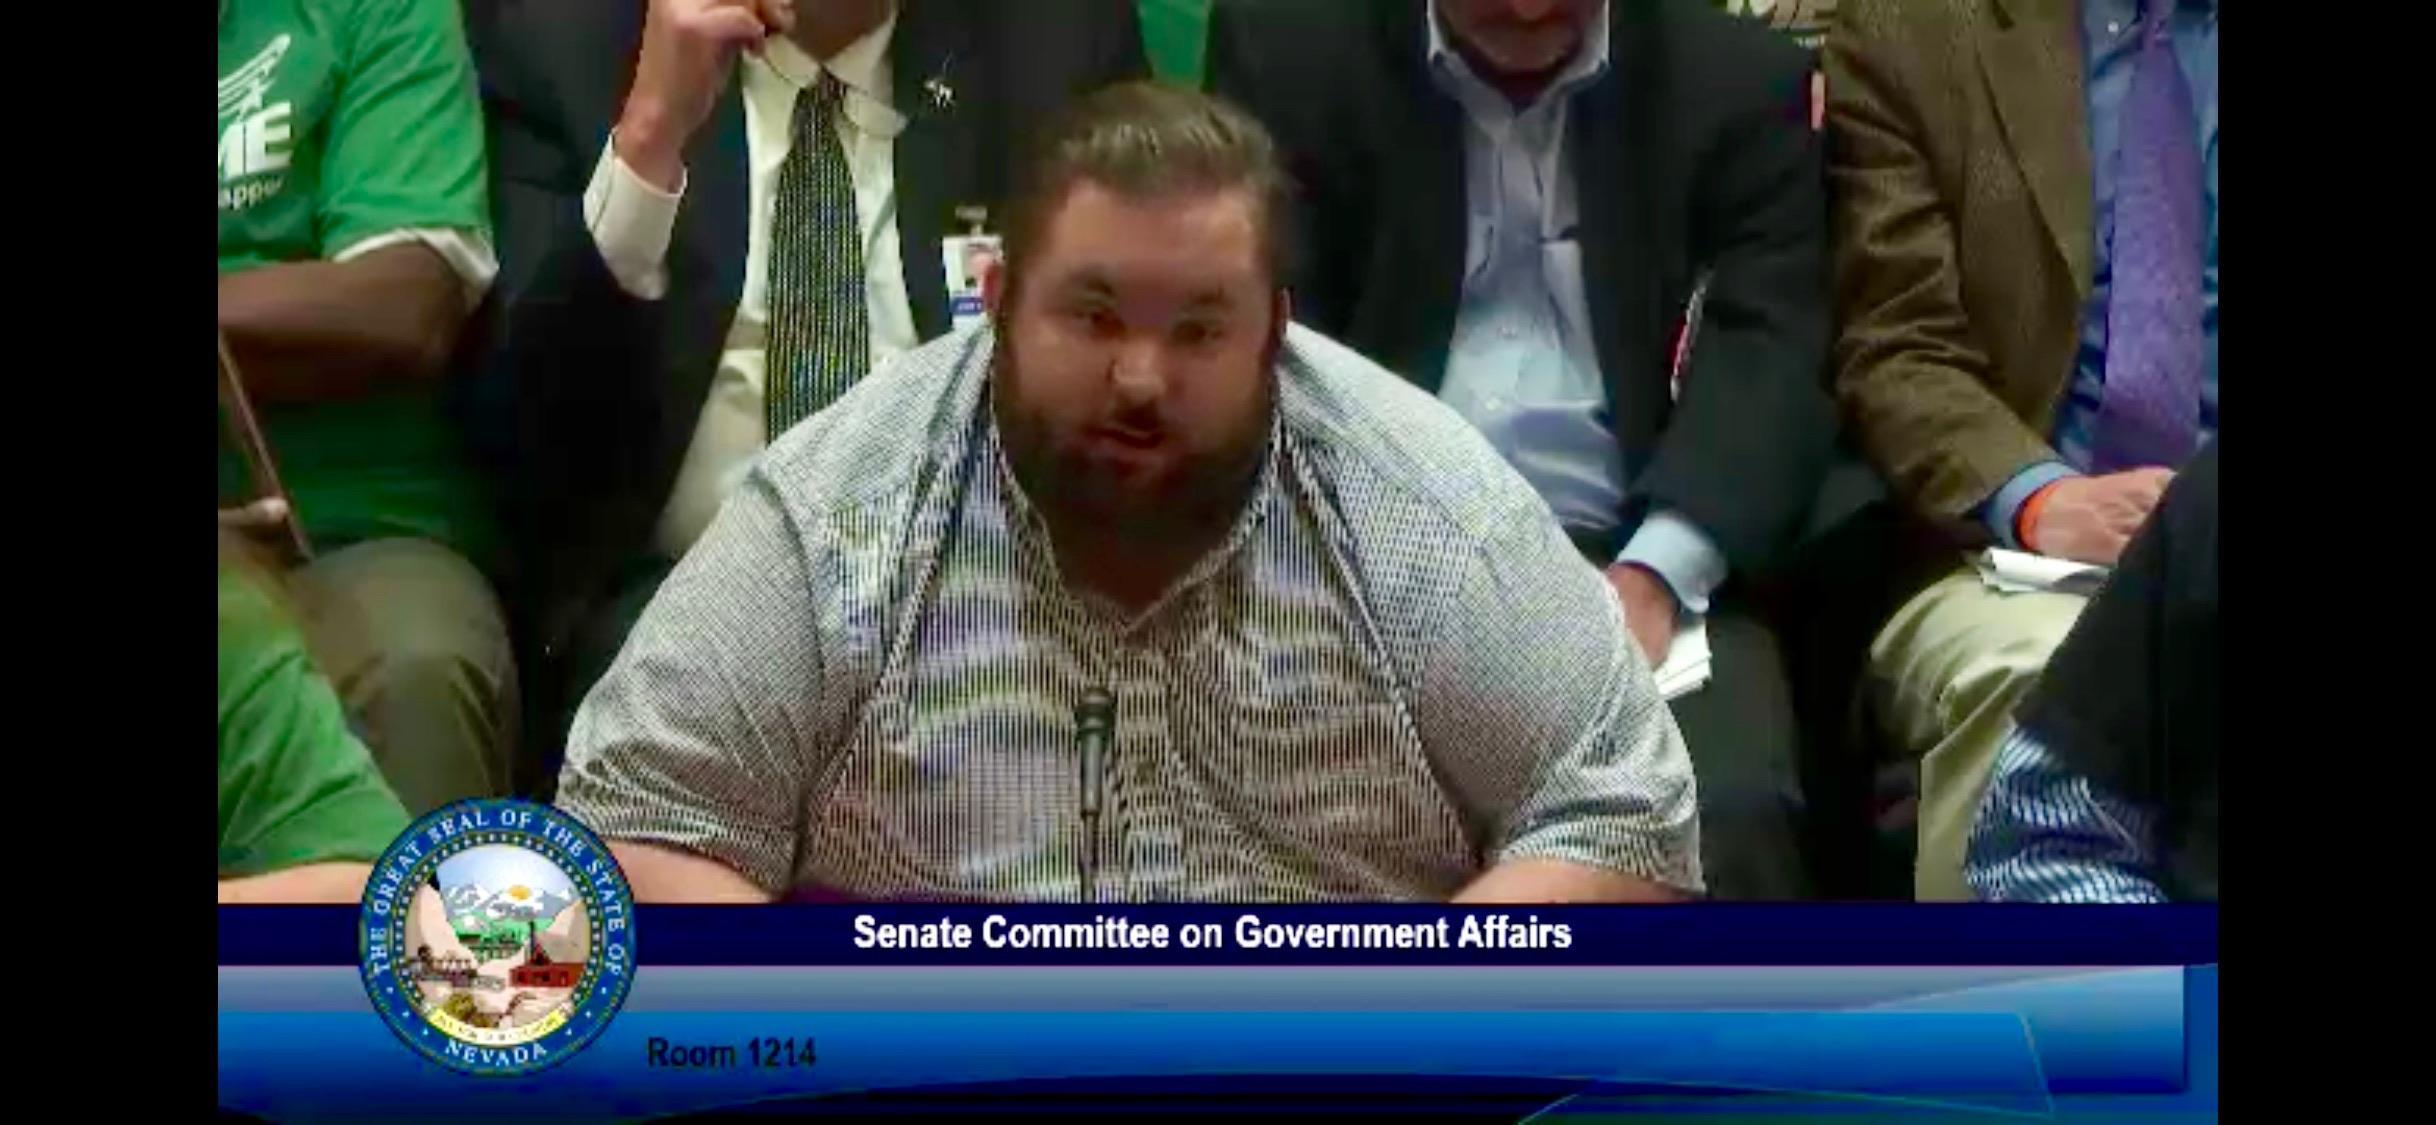 AFSCME Local 4041 member Timothy Provost at a hearing for SB135 in support of collective bargaining rights for state employees